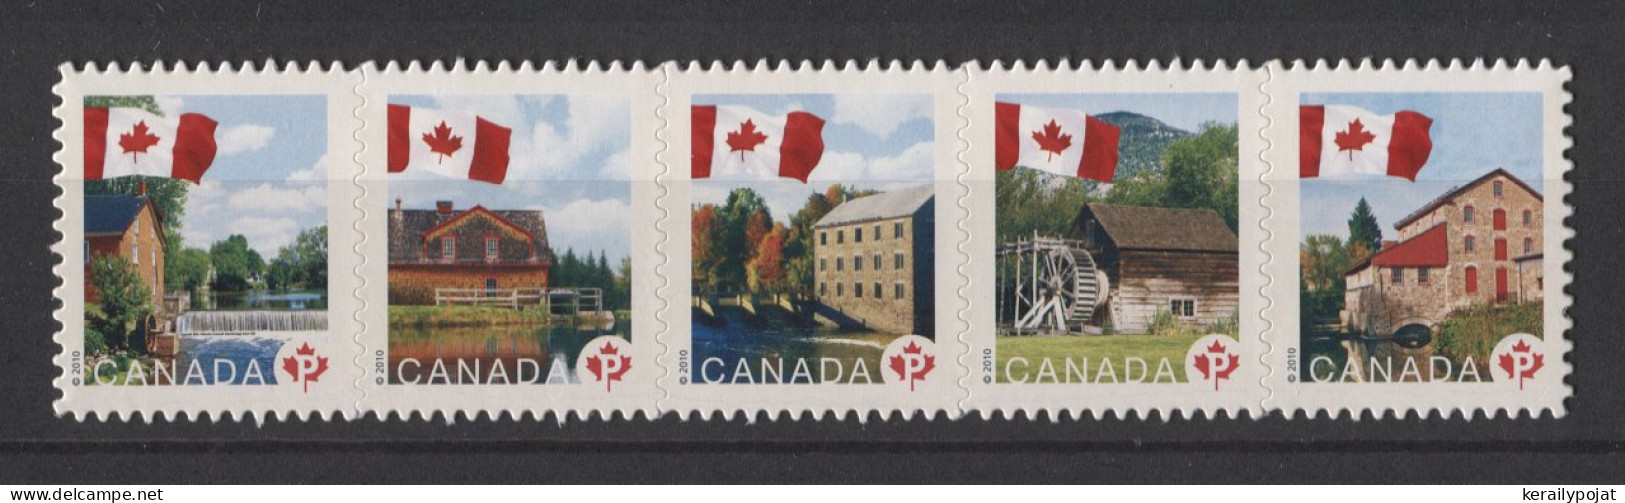 Canada - 2010 National Flag Self-adhesive MNH__(TH-24733) - Unused Stamps